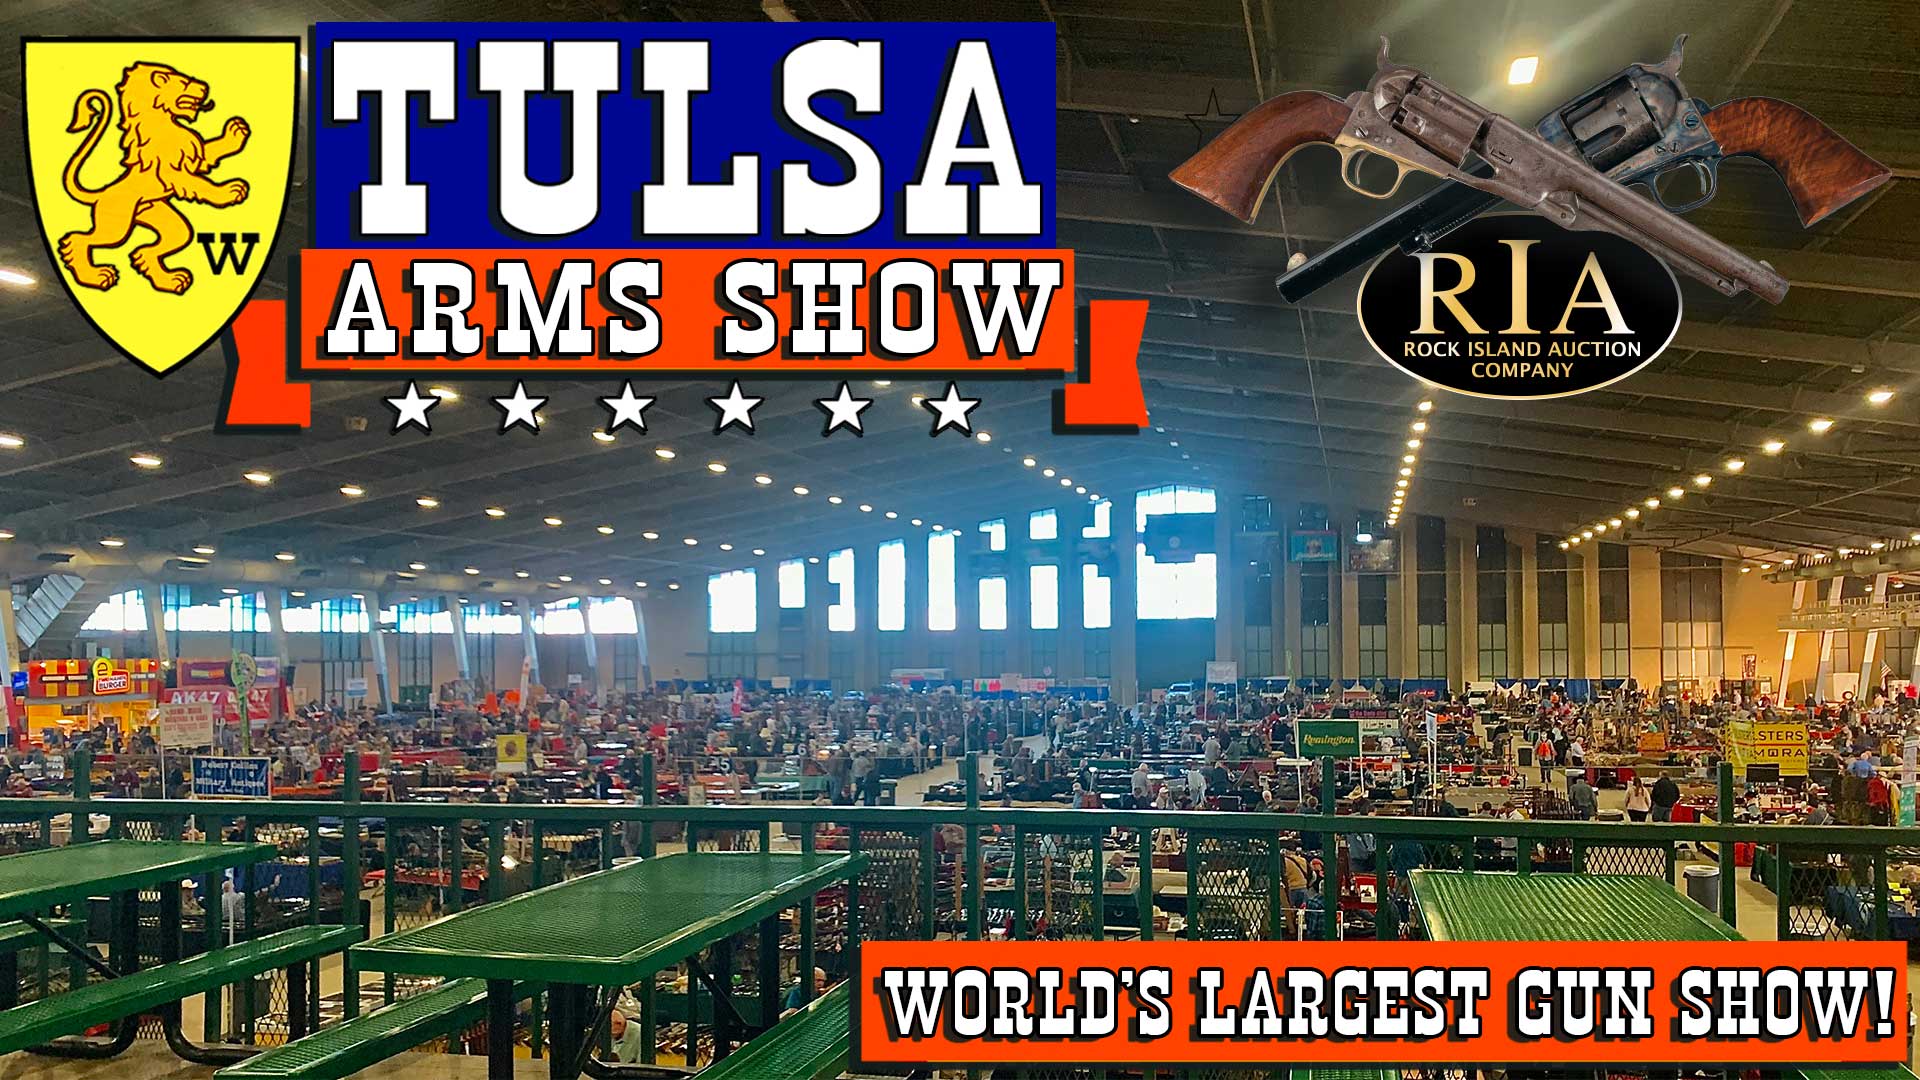 Tulsa-Arms-Show-2022-Largest-Gun-Show-in-the-World